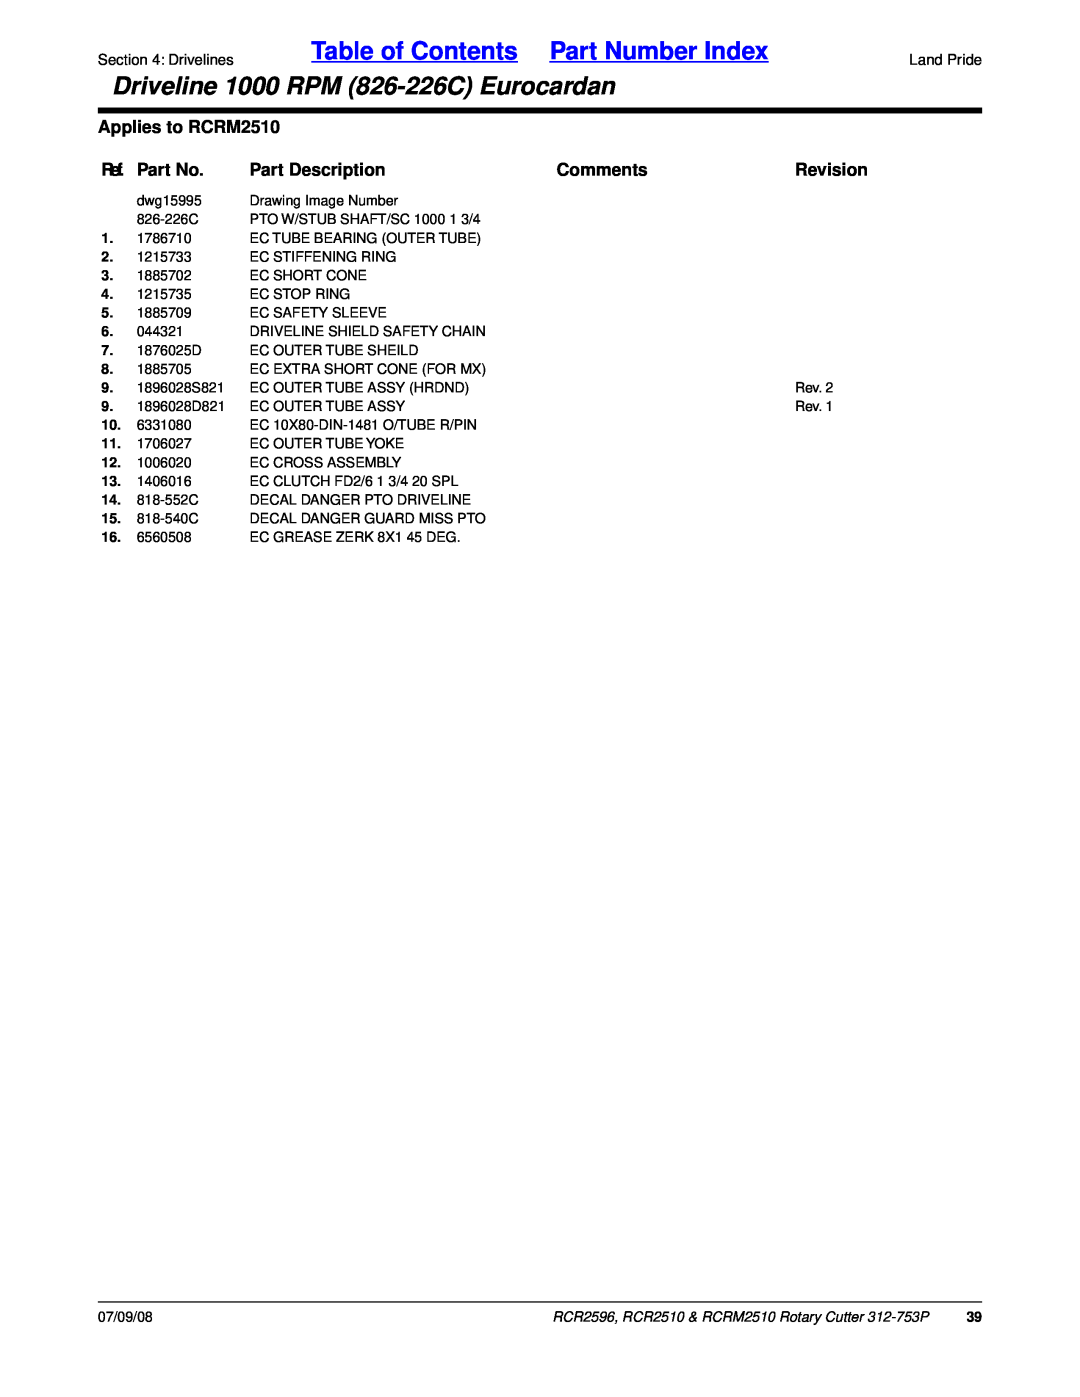 Land Pride RCR2596 manual Table of Contents Part Number Index, Driveline 1000 RPM 826-226CEurocardan, Applies to RCRM2510 